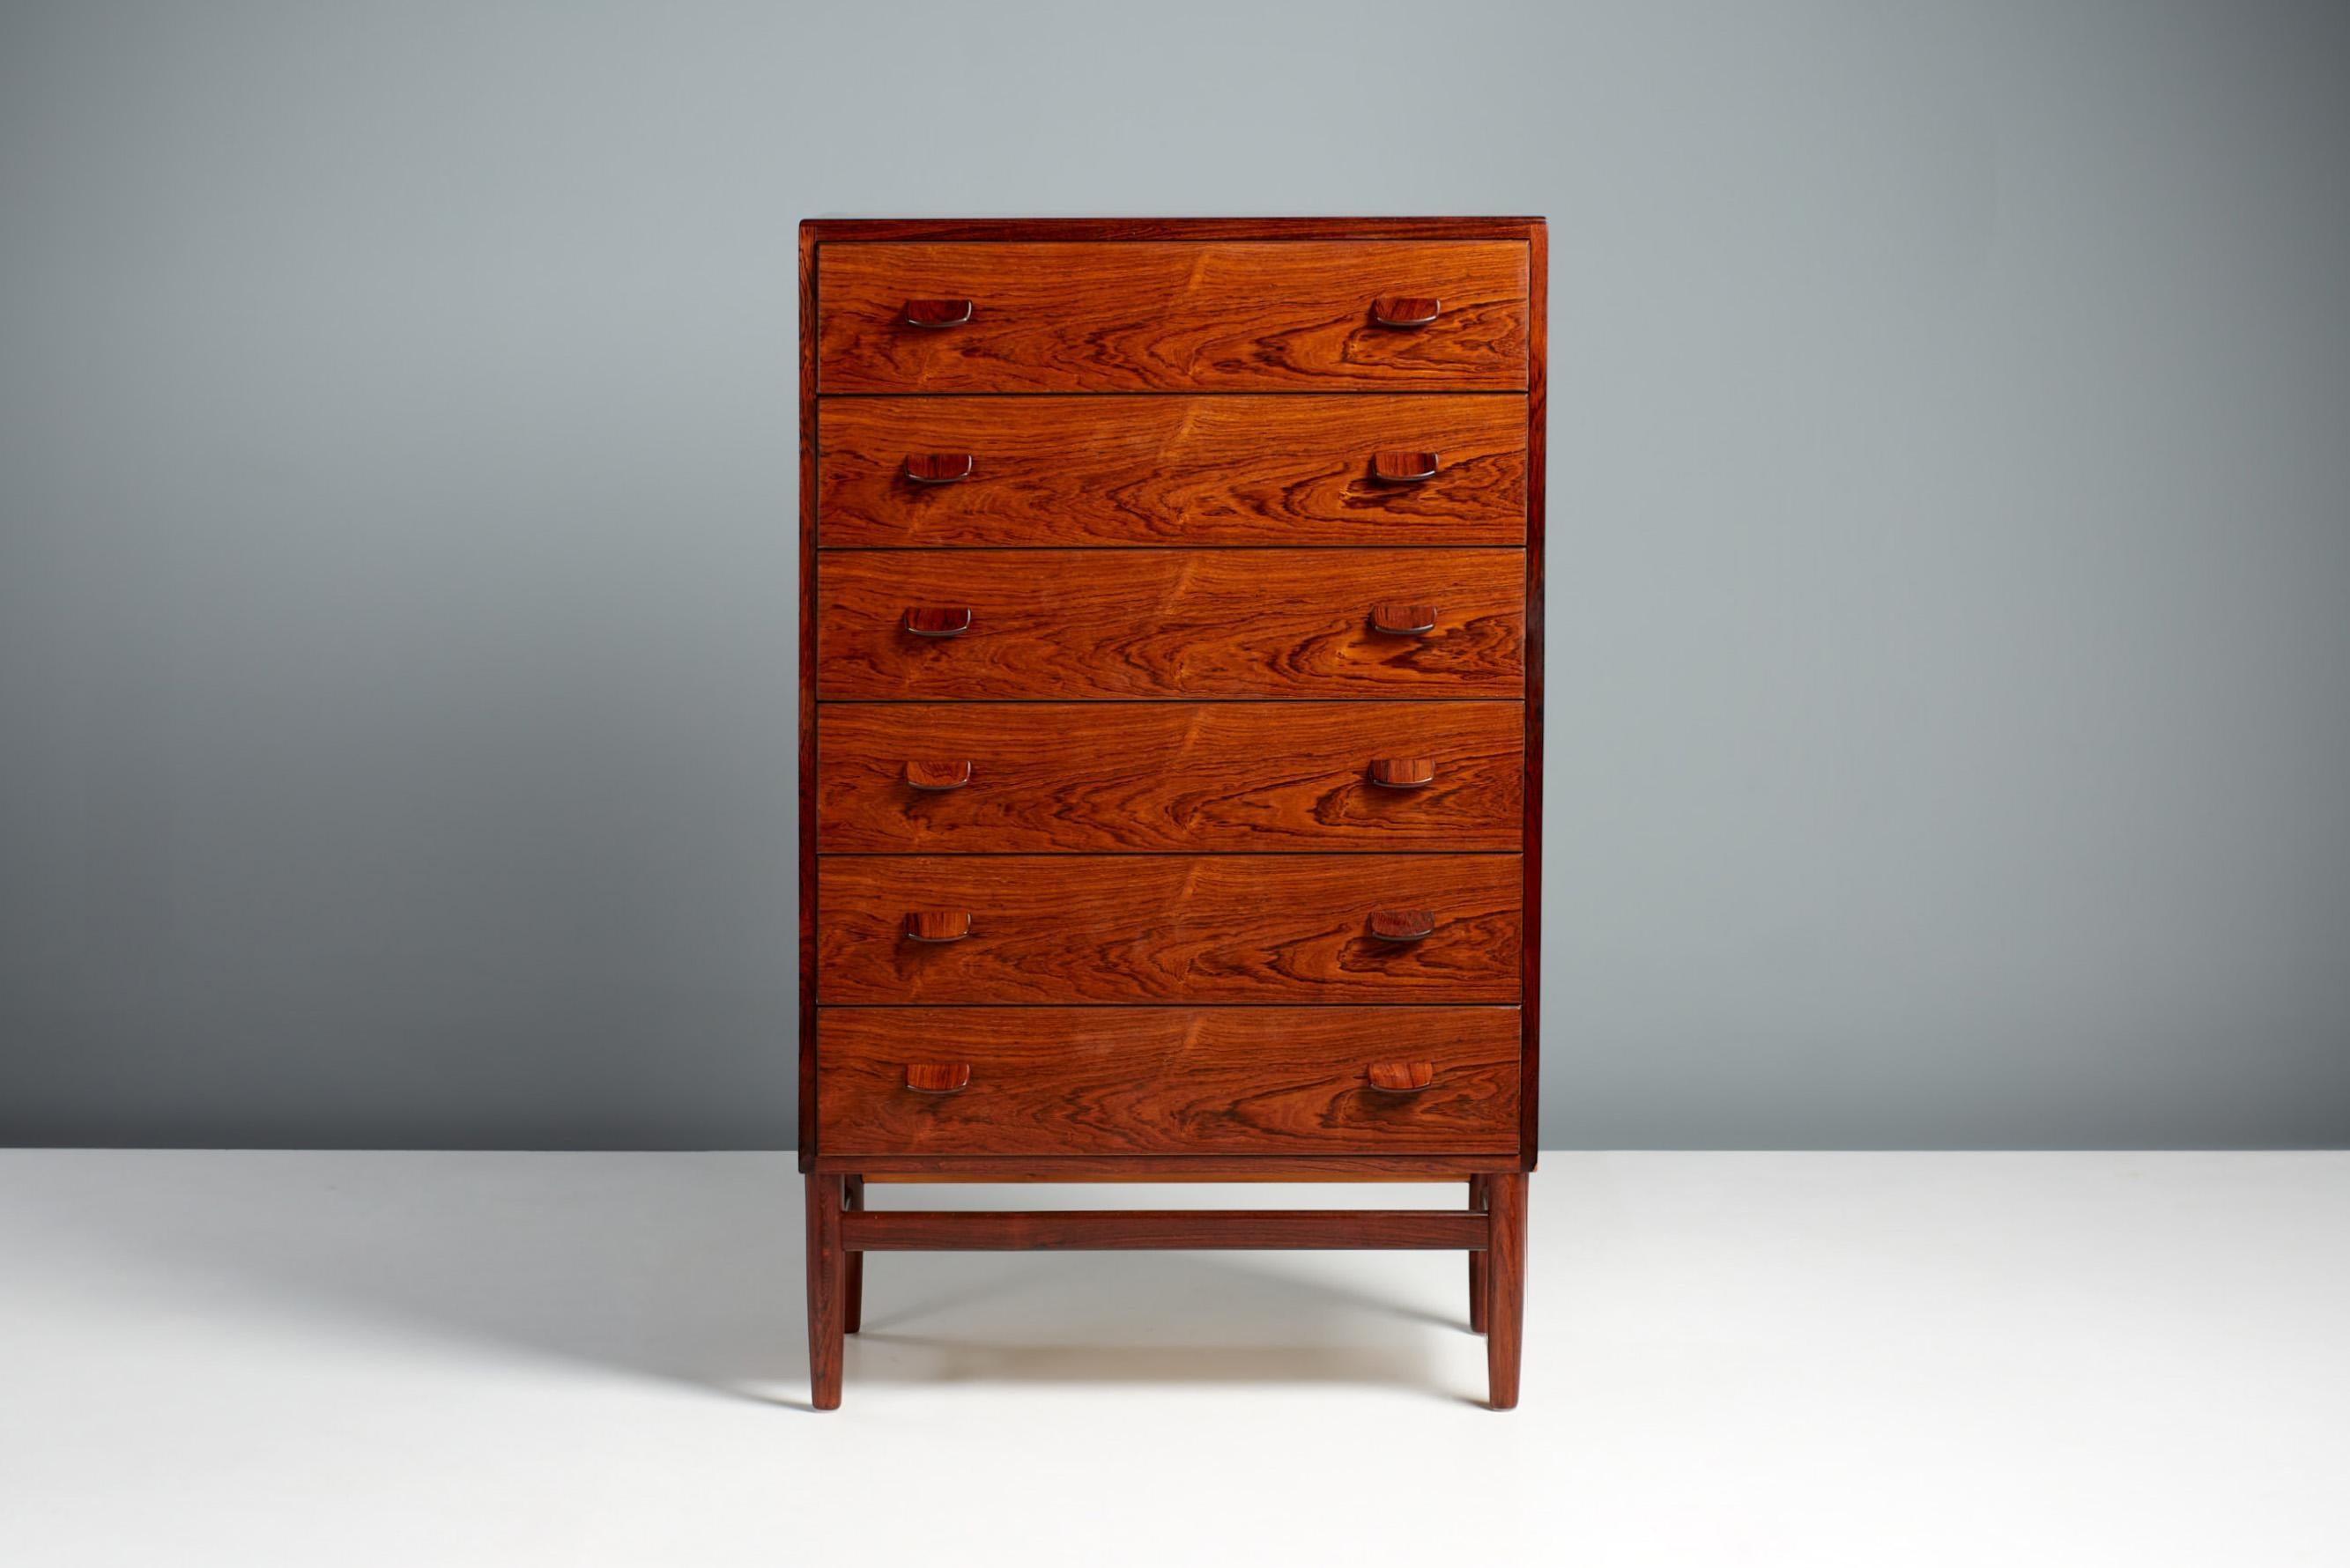 Poul Volther, Model F-17 chest of drawers, circa 1950s.

A tall chest of drawers made from exquisite solid and veneered rosewood with six drawers. The chest is in immaculate condition and has been carefully resotred at our workshops in London.